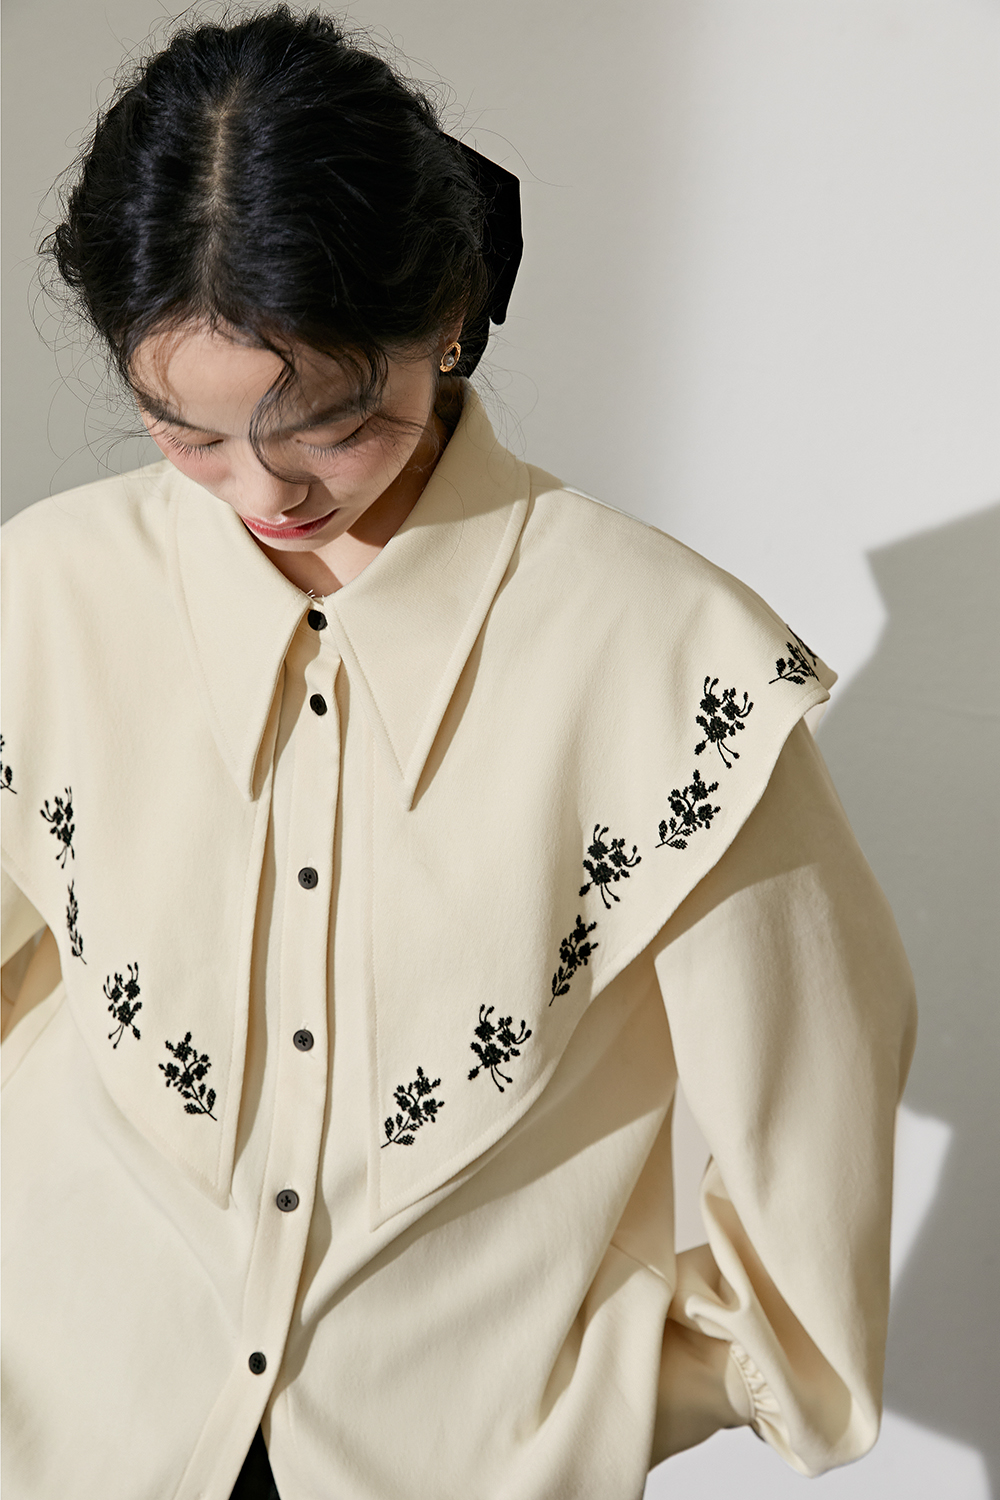 Fashionable shirt for women in winter 2022 new style embroidered lapel lantern sleeve loose shirt